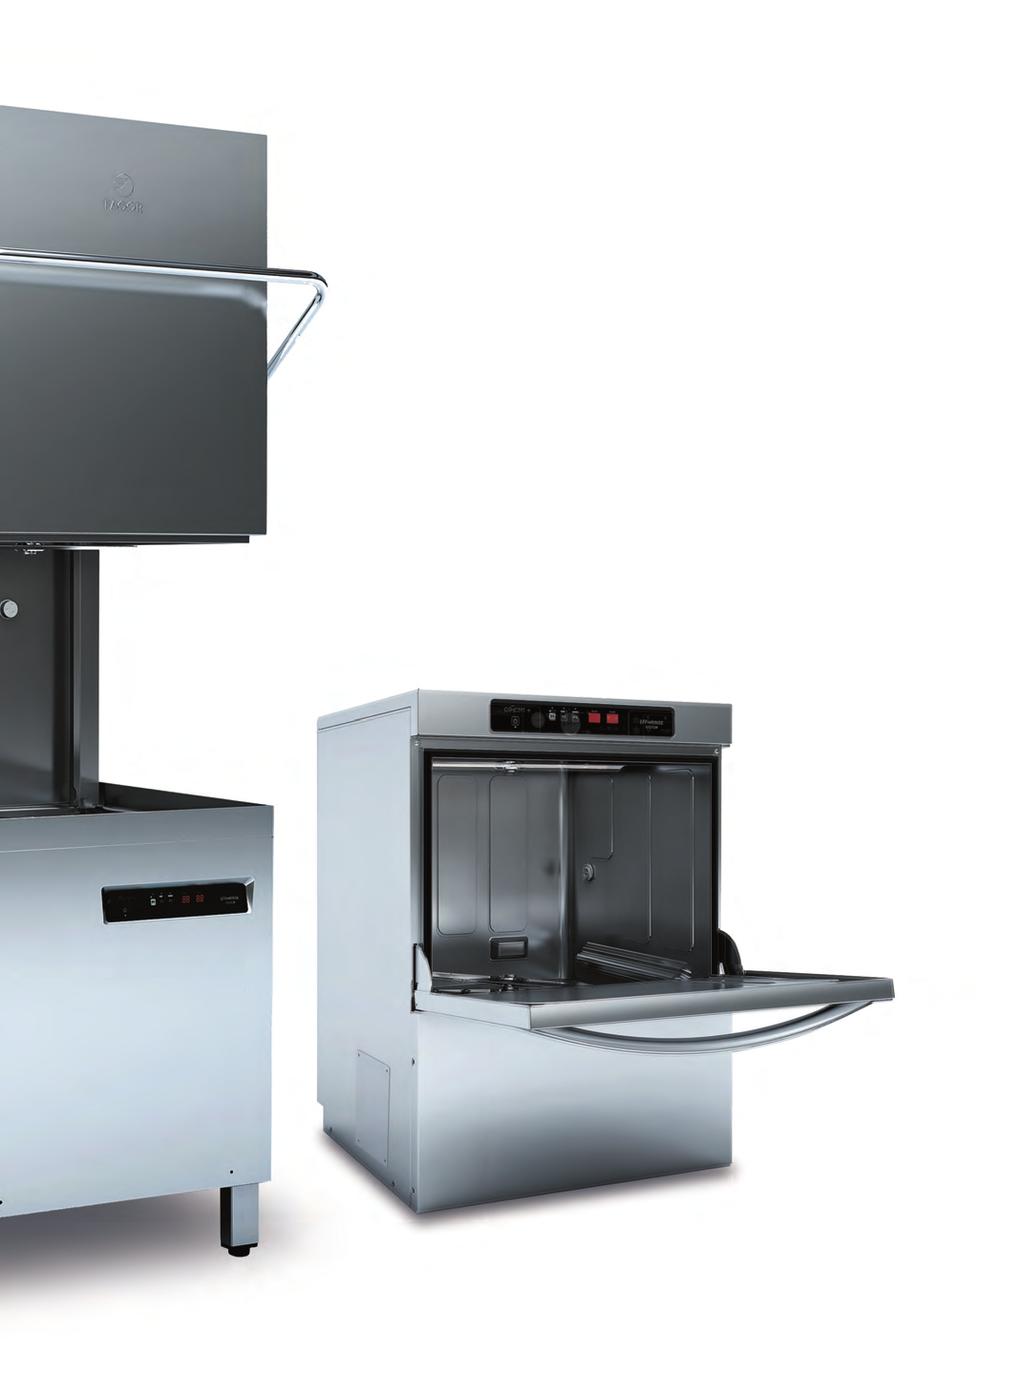 FAGOR COMMERCIAL FOODSERVICE EQUIPMENT 01.